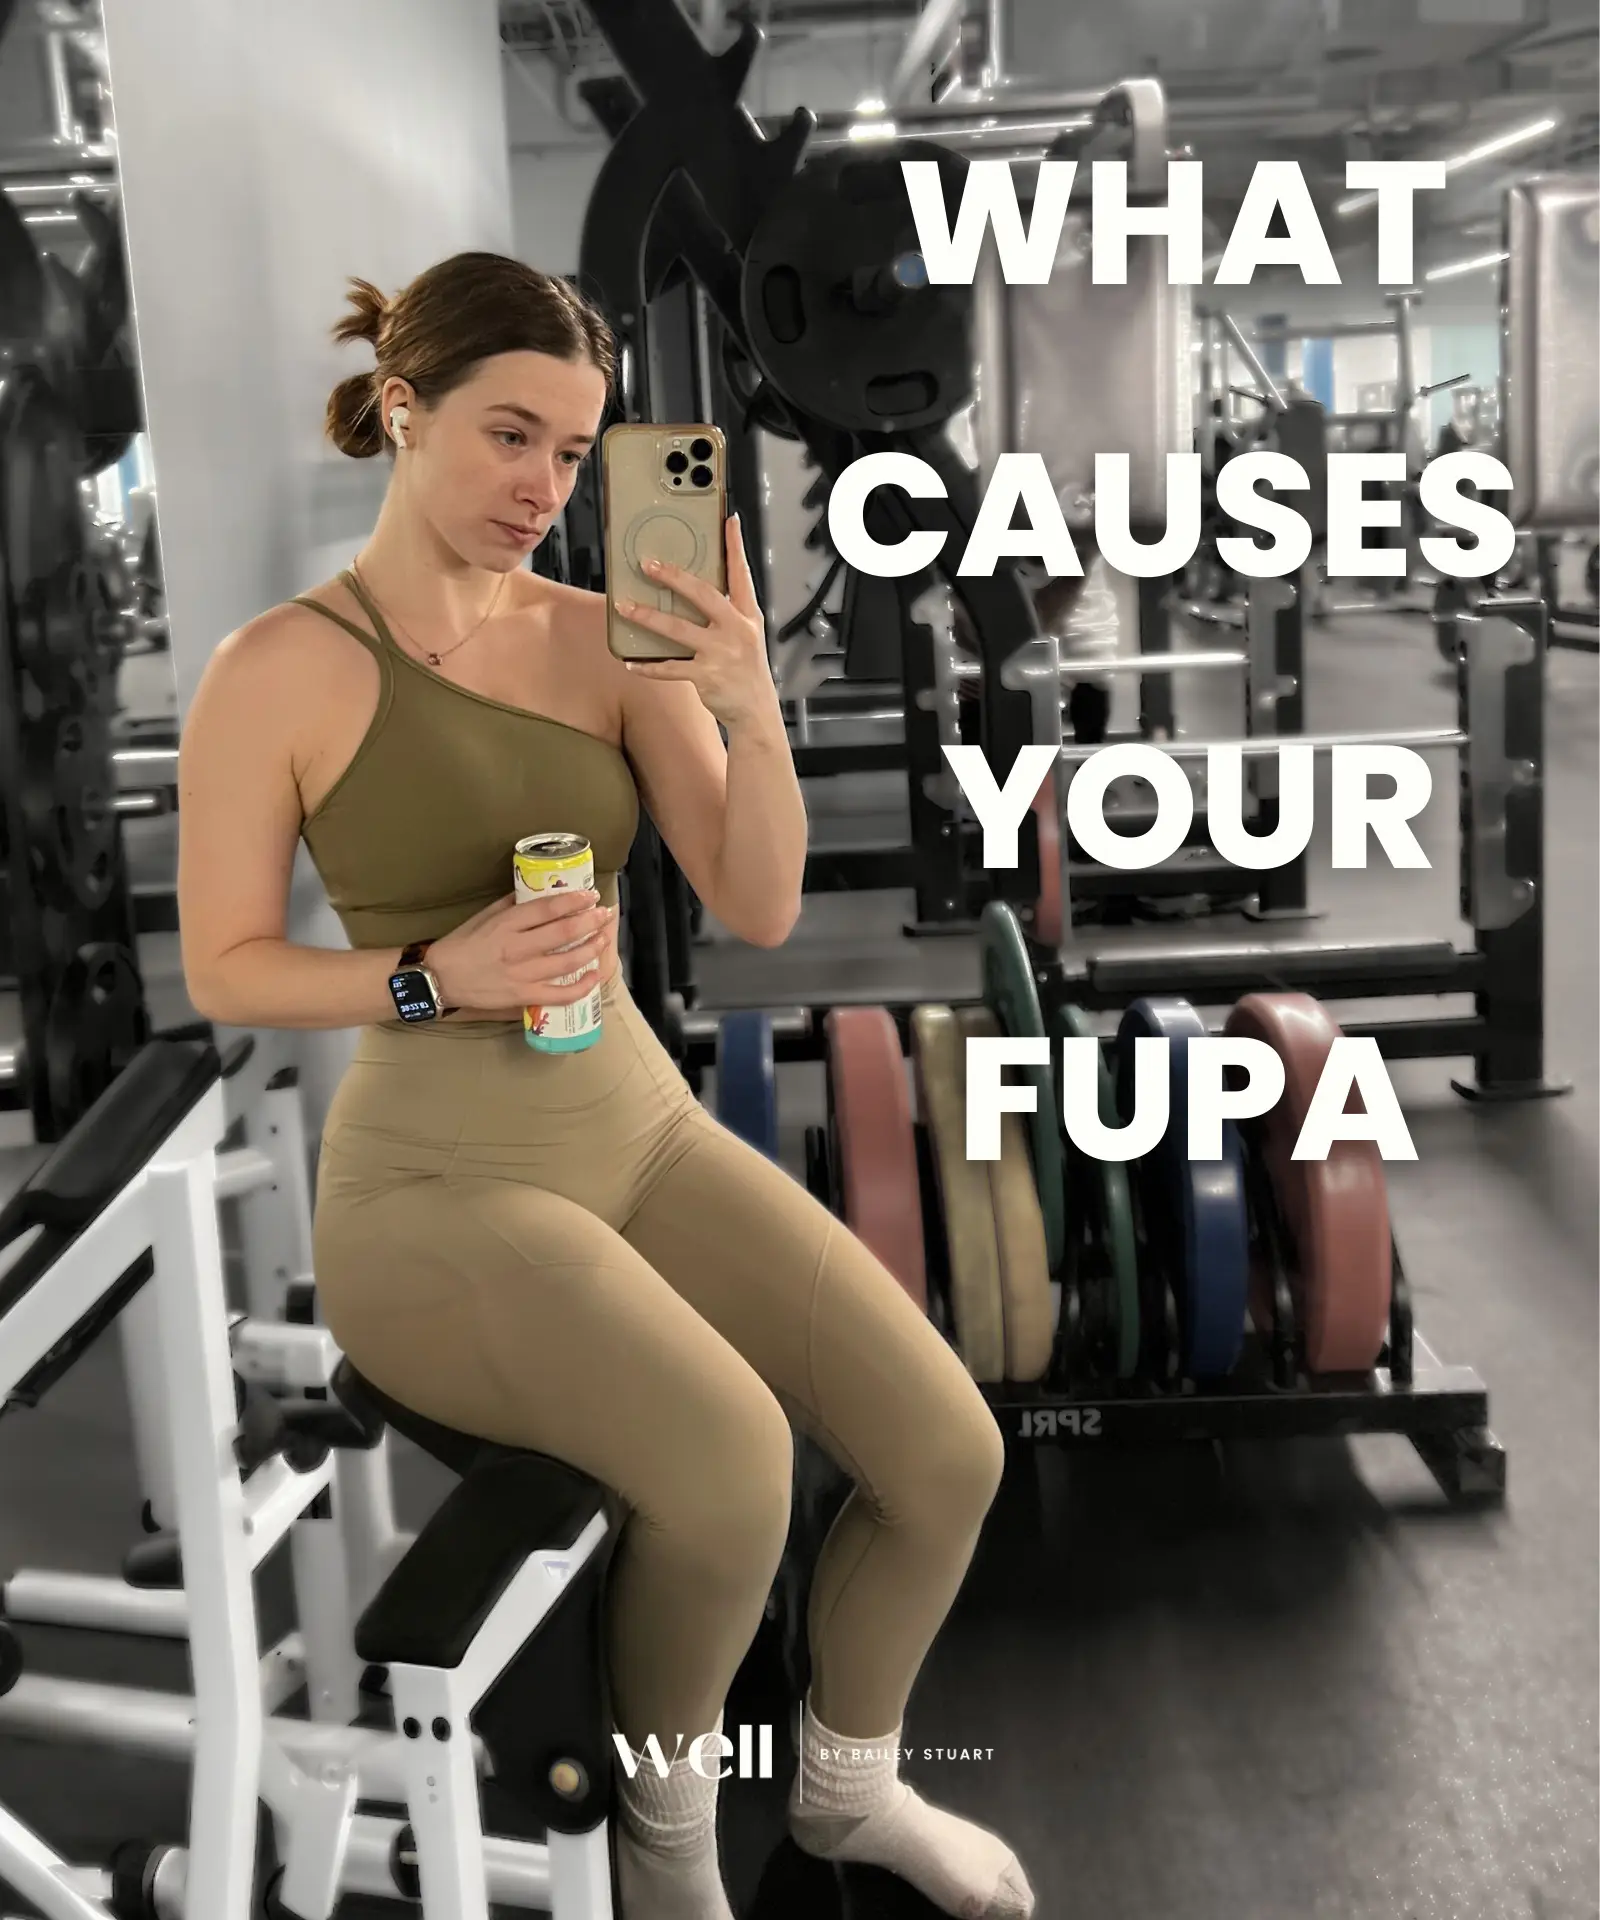 Are u self-conscious about the FUPA fat 🤔 we are here to help u